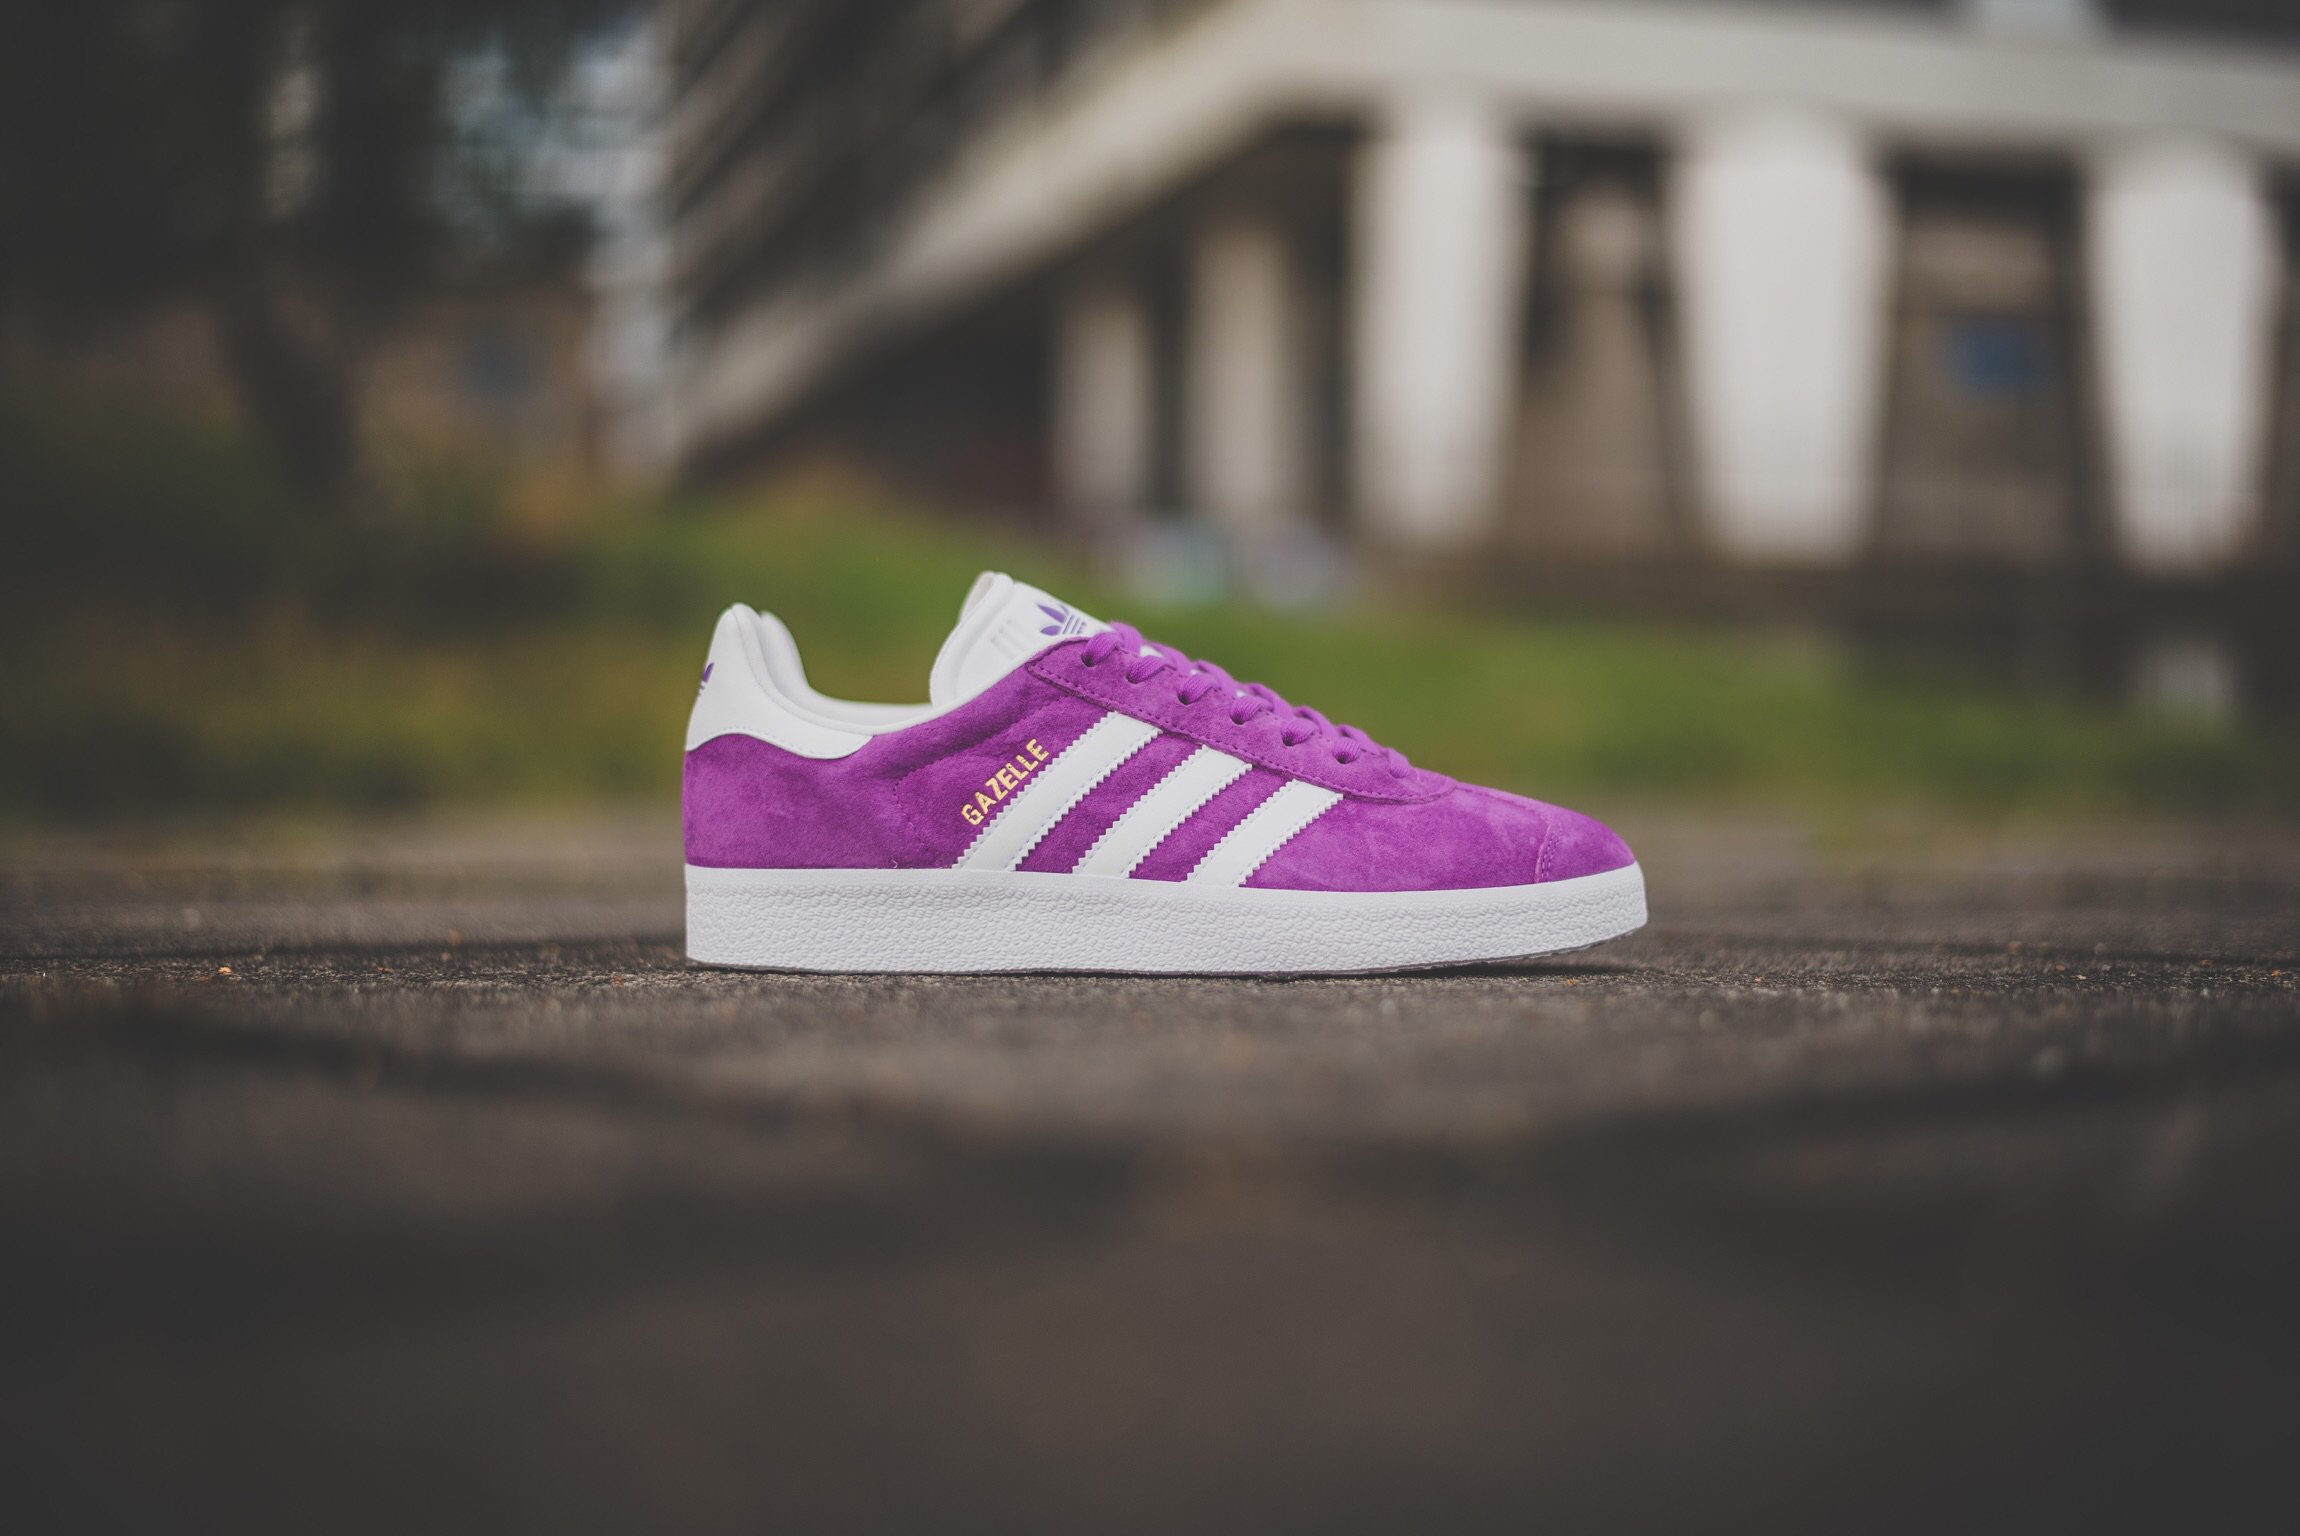 HANON on Twitter: "adidas “Shock Purple” is available to buy ONLINE now! #hanon #adidas https://t.co/ydTw6B4ydH https://t.co/sWNaIbsPW3" / Twitter